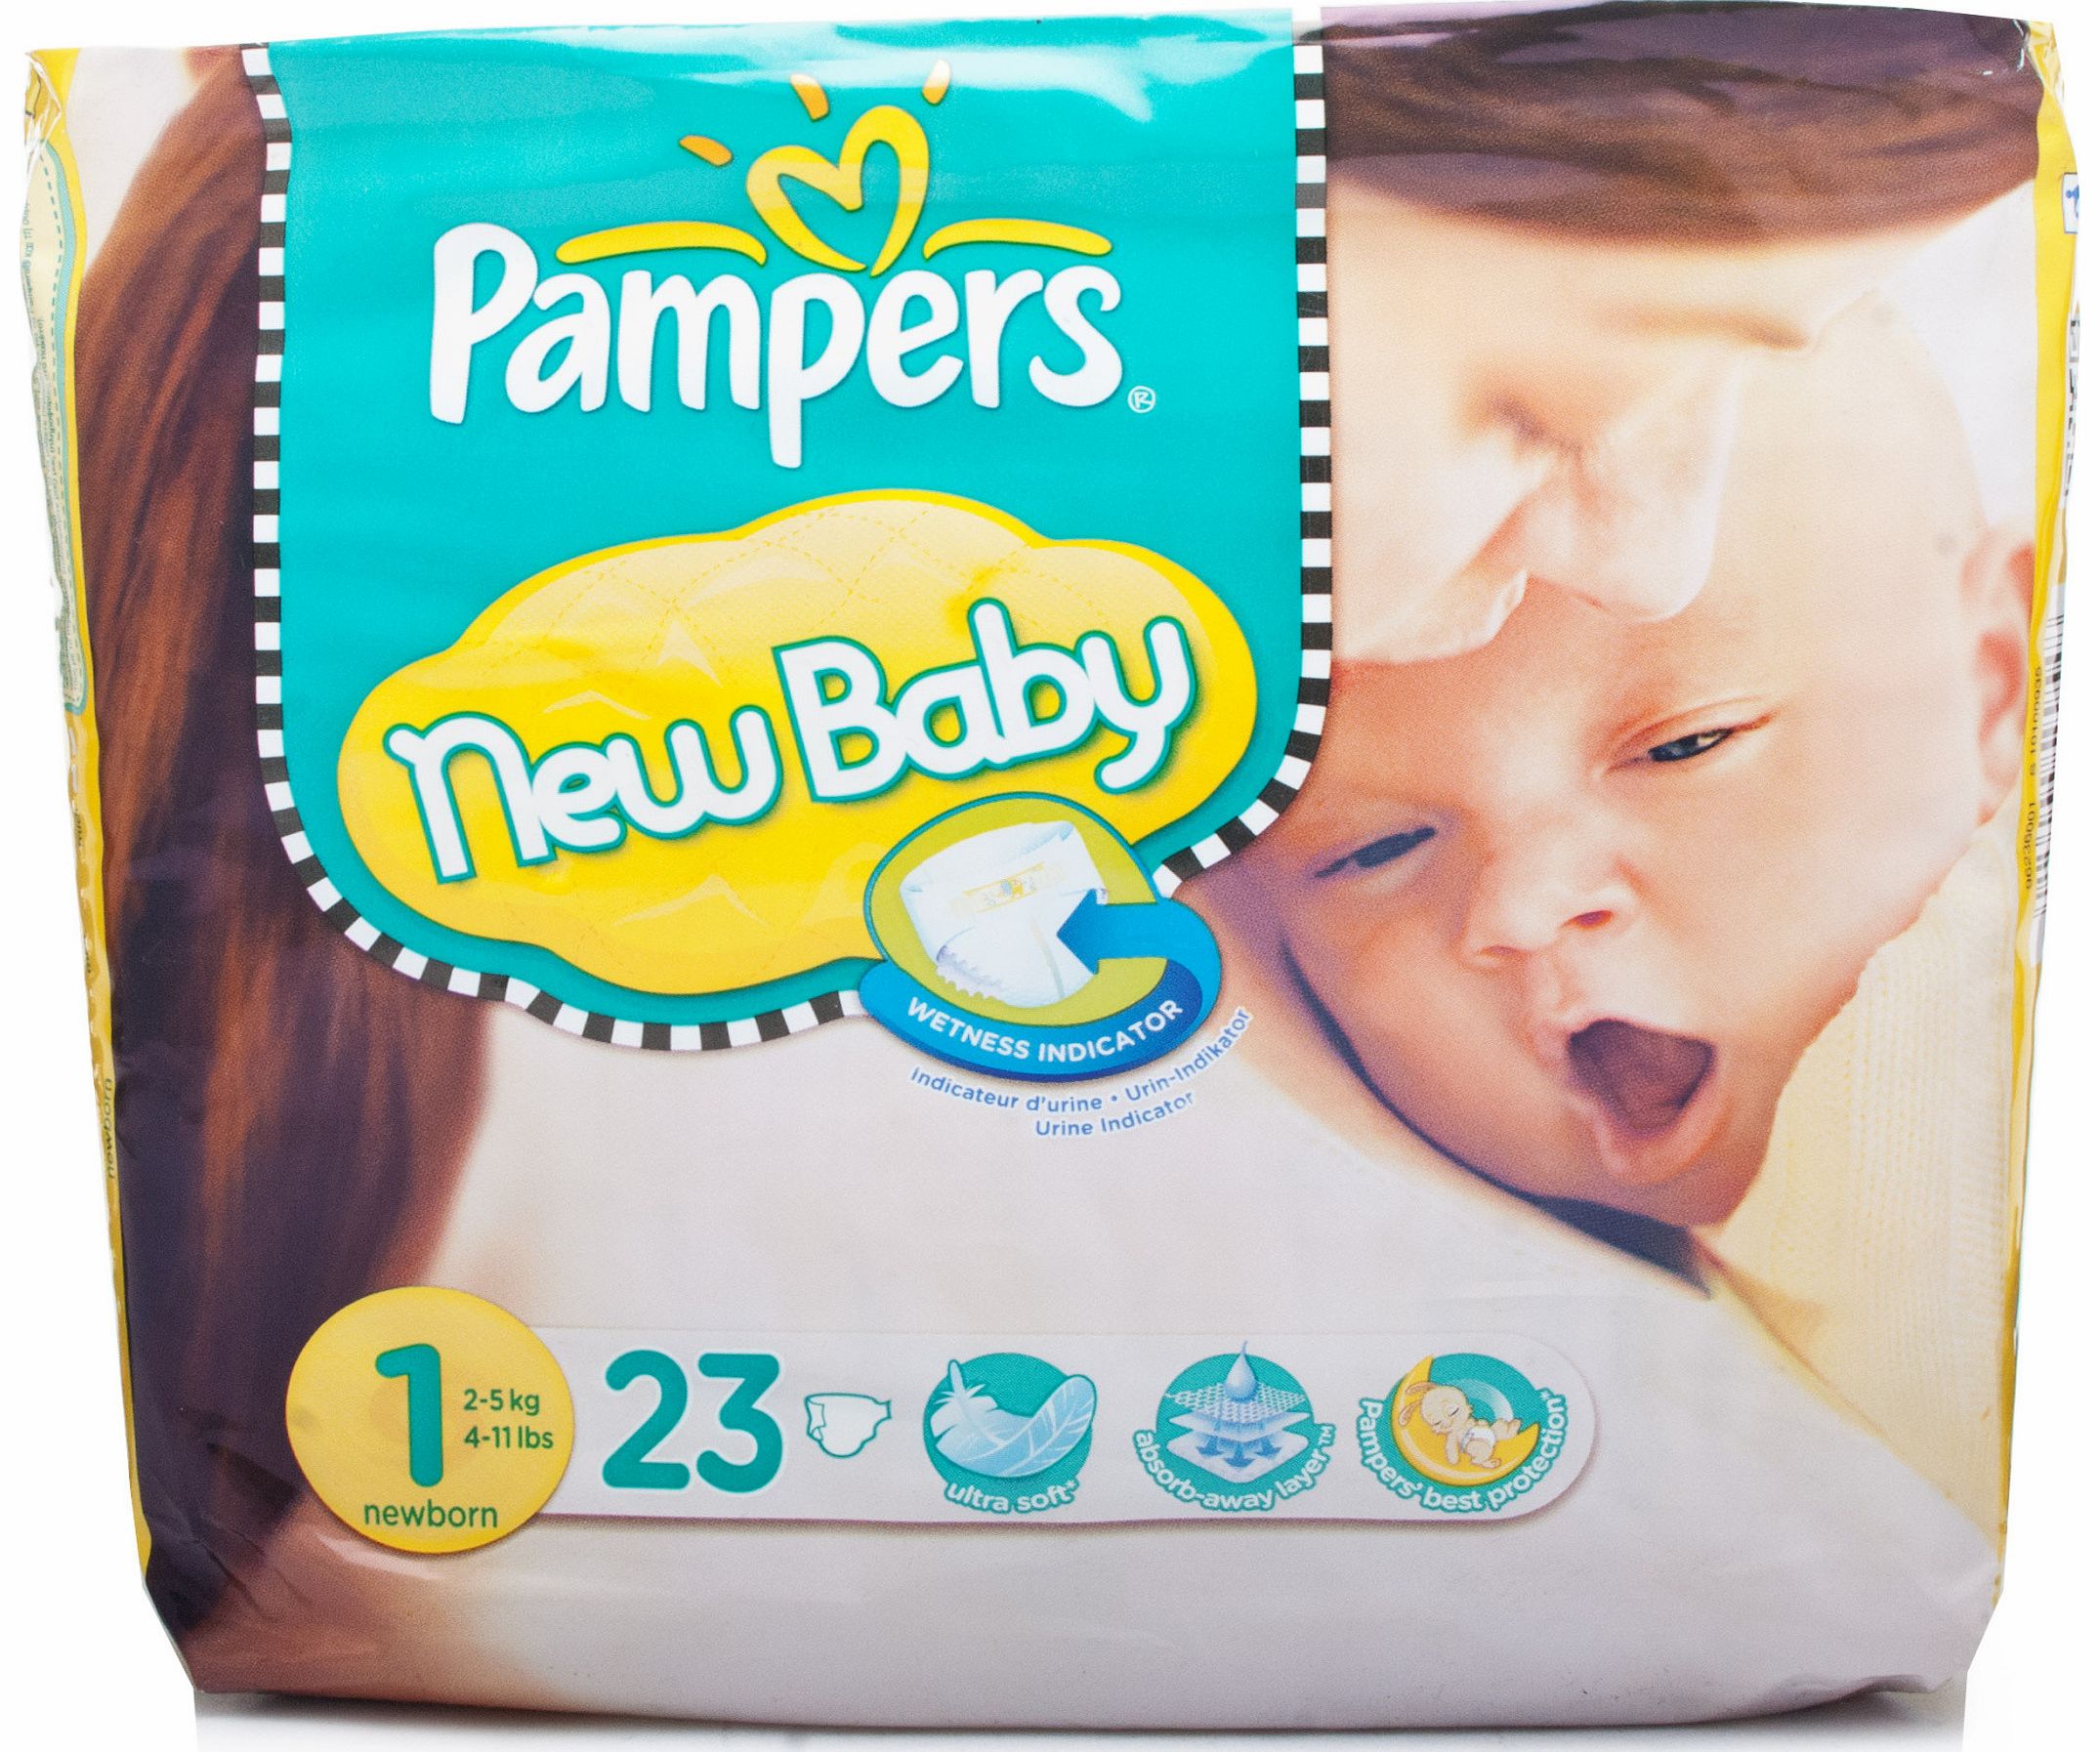 Pampers Newbaby Nappy